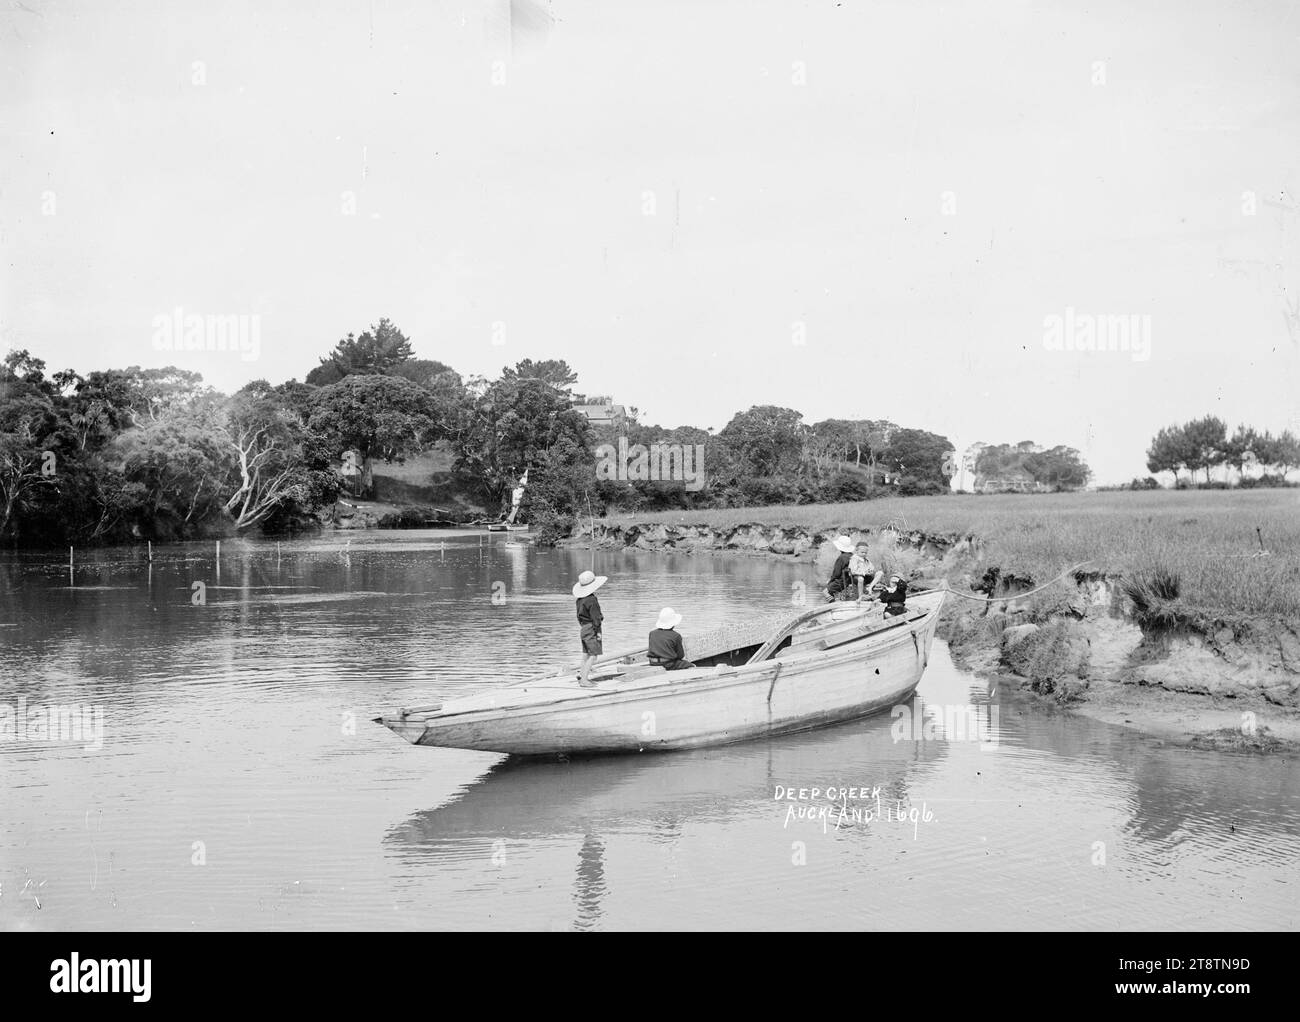 Boys playing on a boat at Deep Creek, Torbay, Auckland, New Zealand, Boys playing on an old yacht tied up to the bank at Deep Creek. A catamaran can be seen in the distance. Taken in the early 1900s Stock Photo